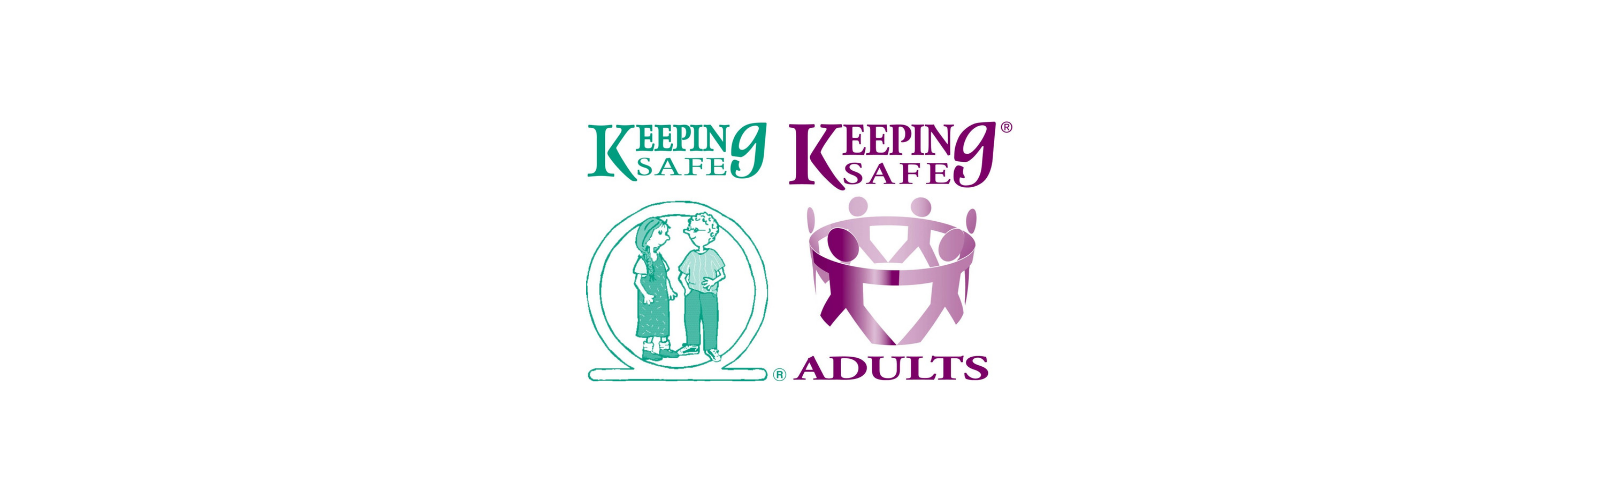 Keeping Children and Adults Safe: Training for Staff and Volunteers Refresher